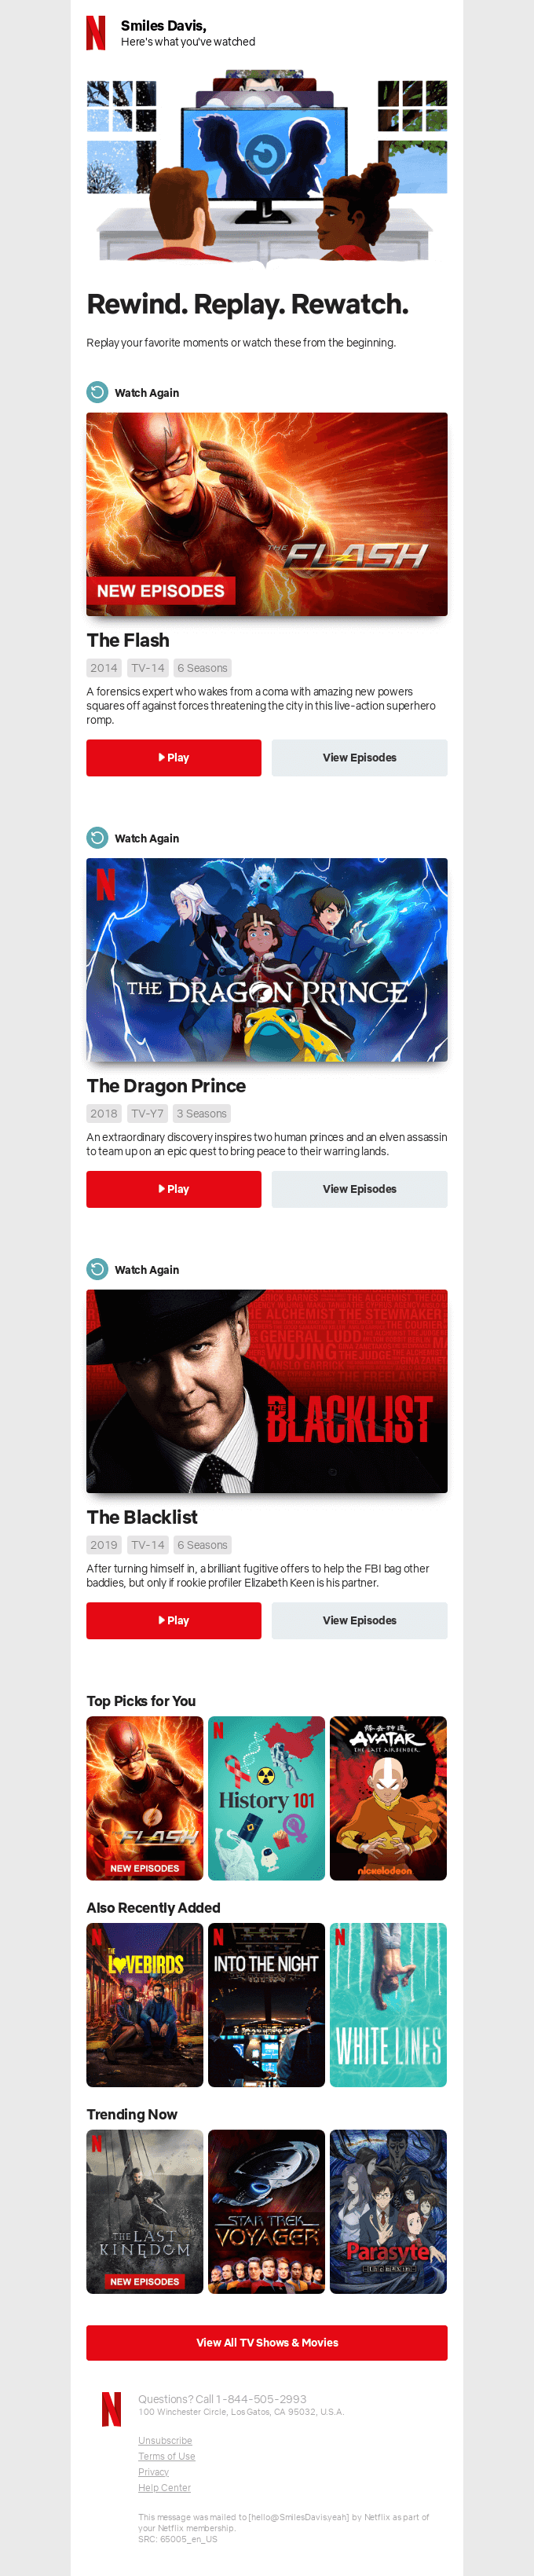 Winback Email Campaign by Netflix